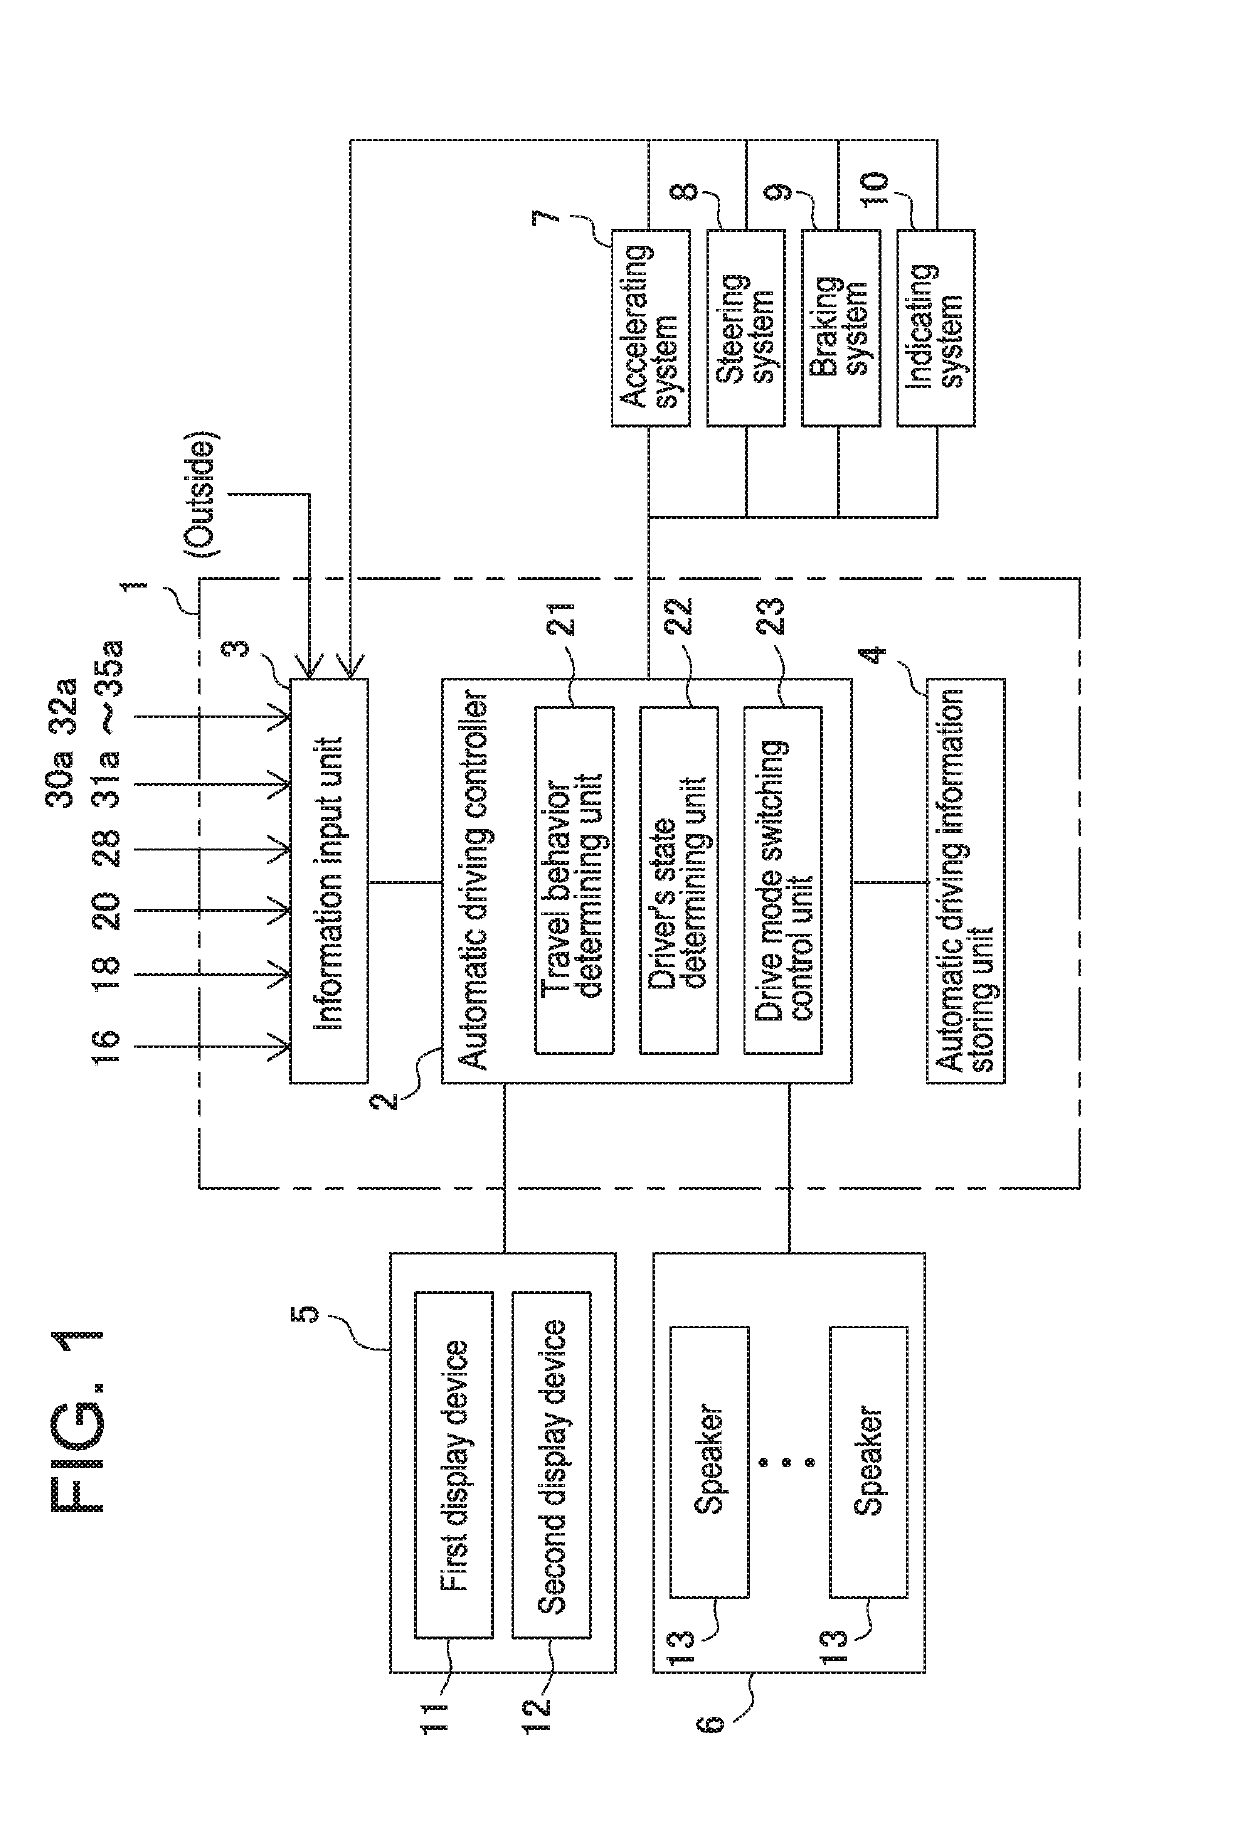 Automatic driving system for vehicles